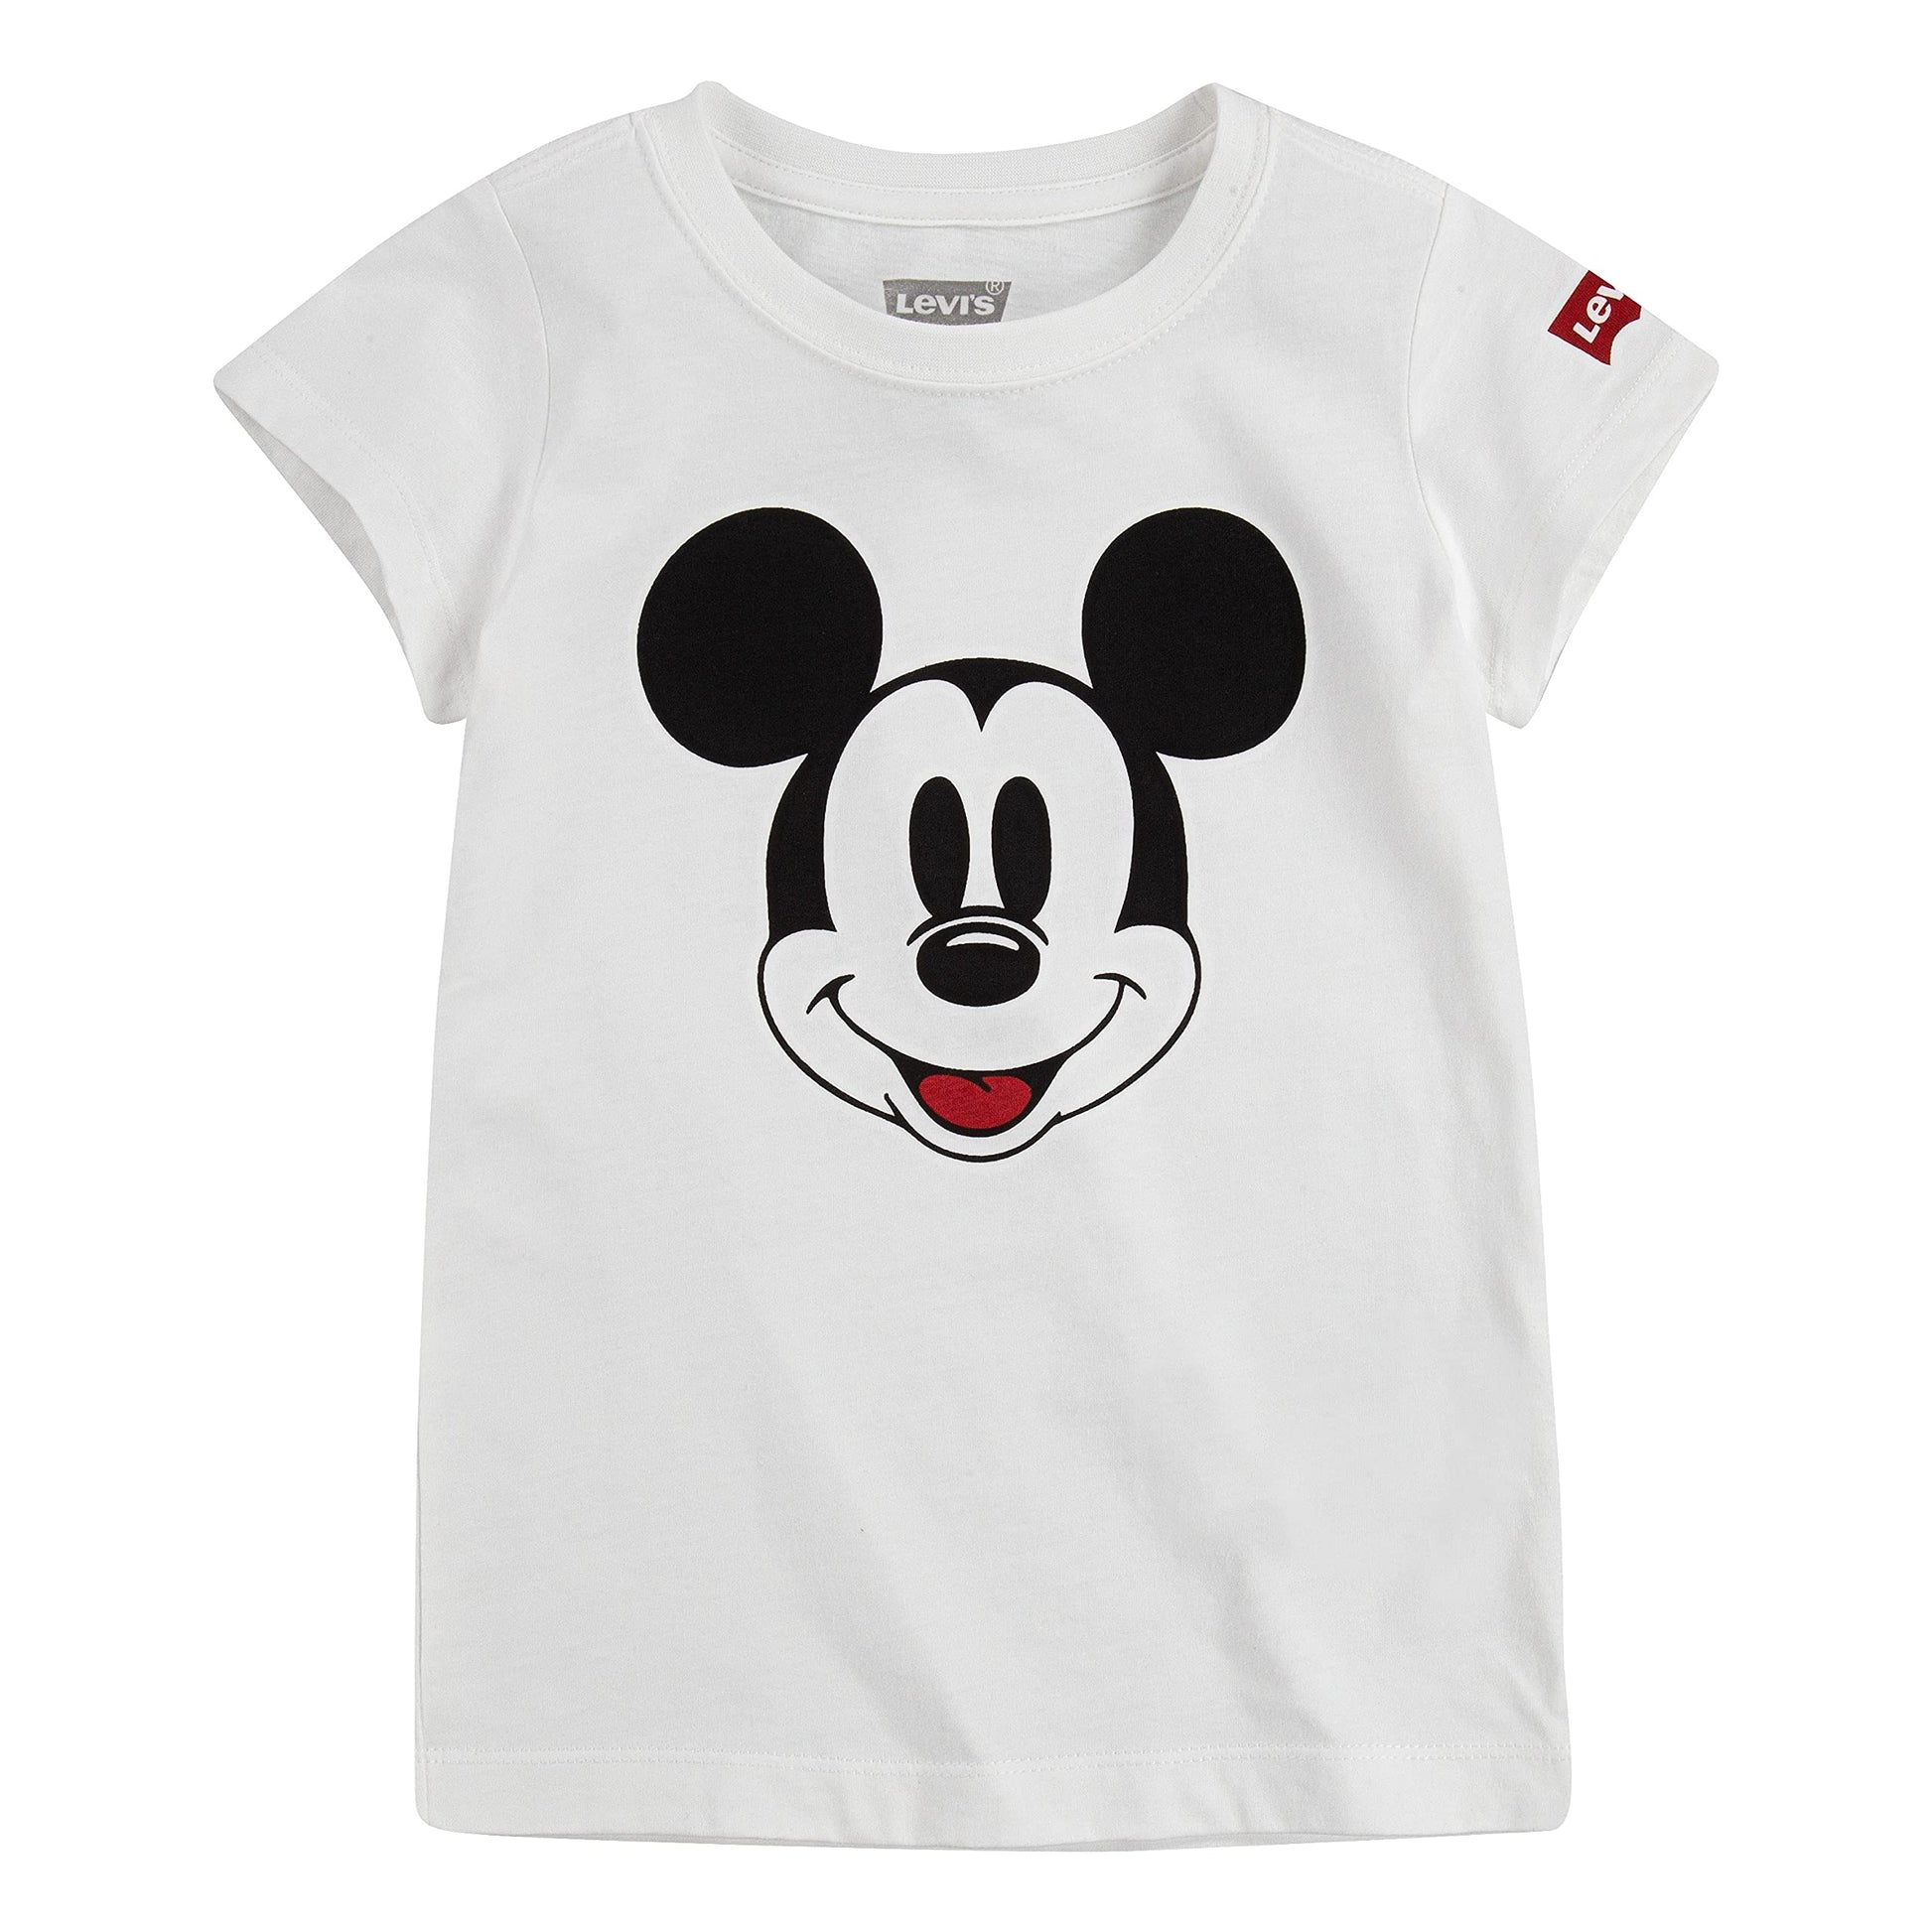 Image 1 of Levi's x Disney Mickey Mouse T-Shirt (Toddler)